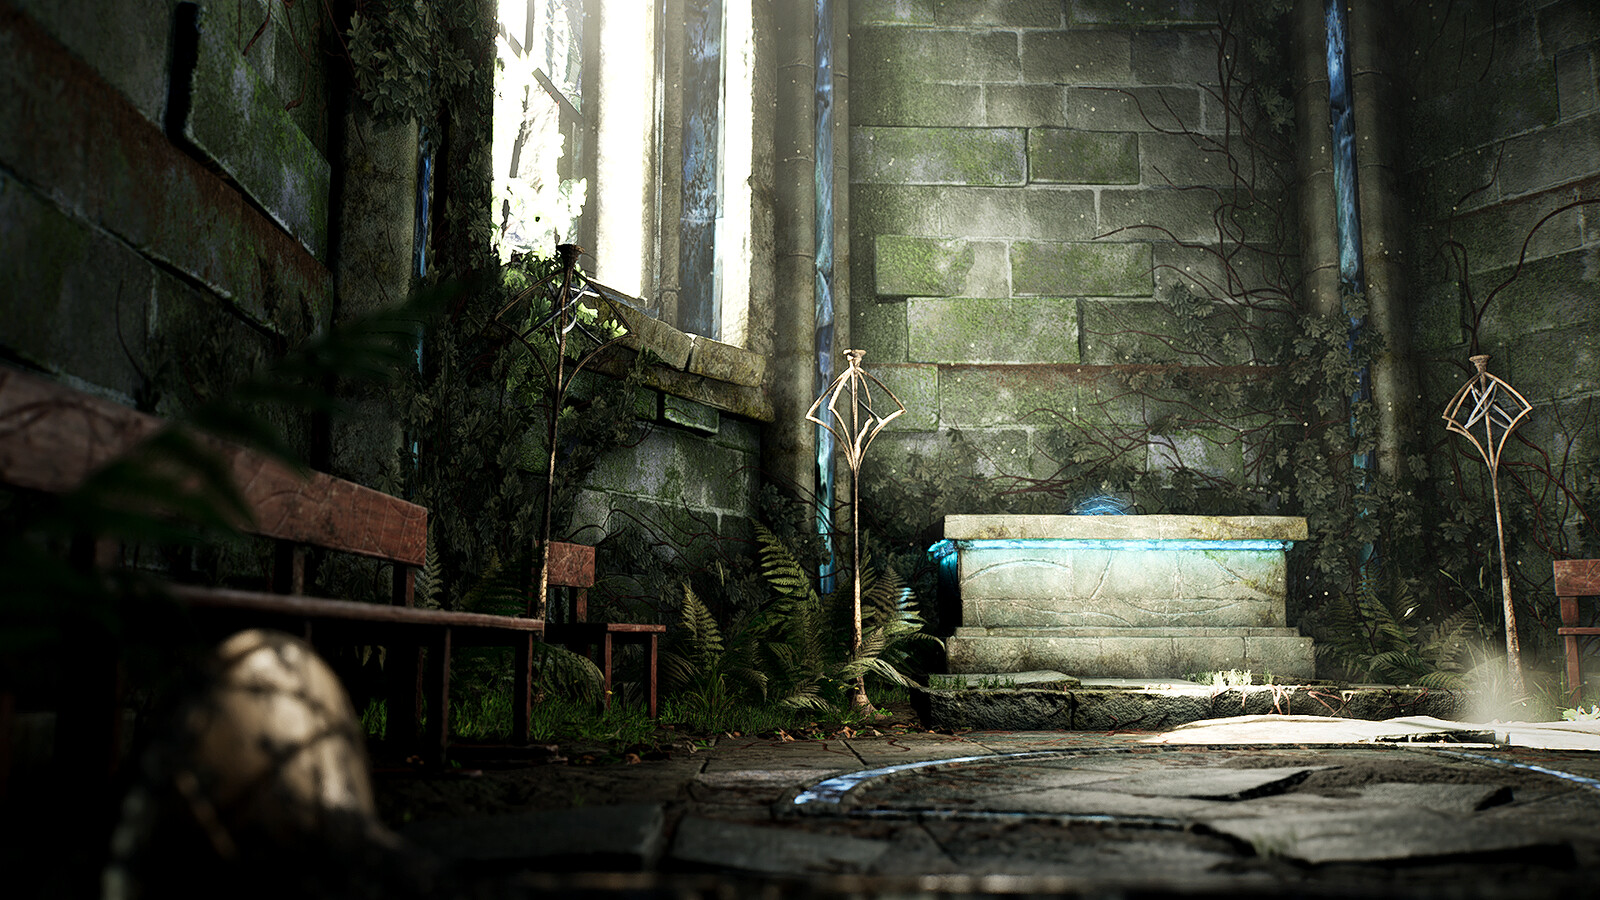 02 - Benches and Chairs were modelled with the same Houdini asset to practice some basic procedural modelling.